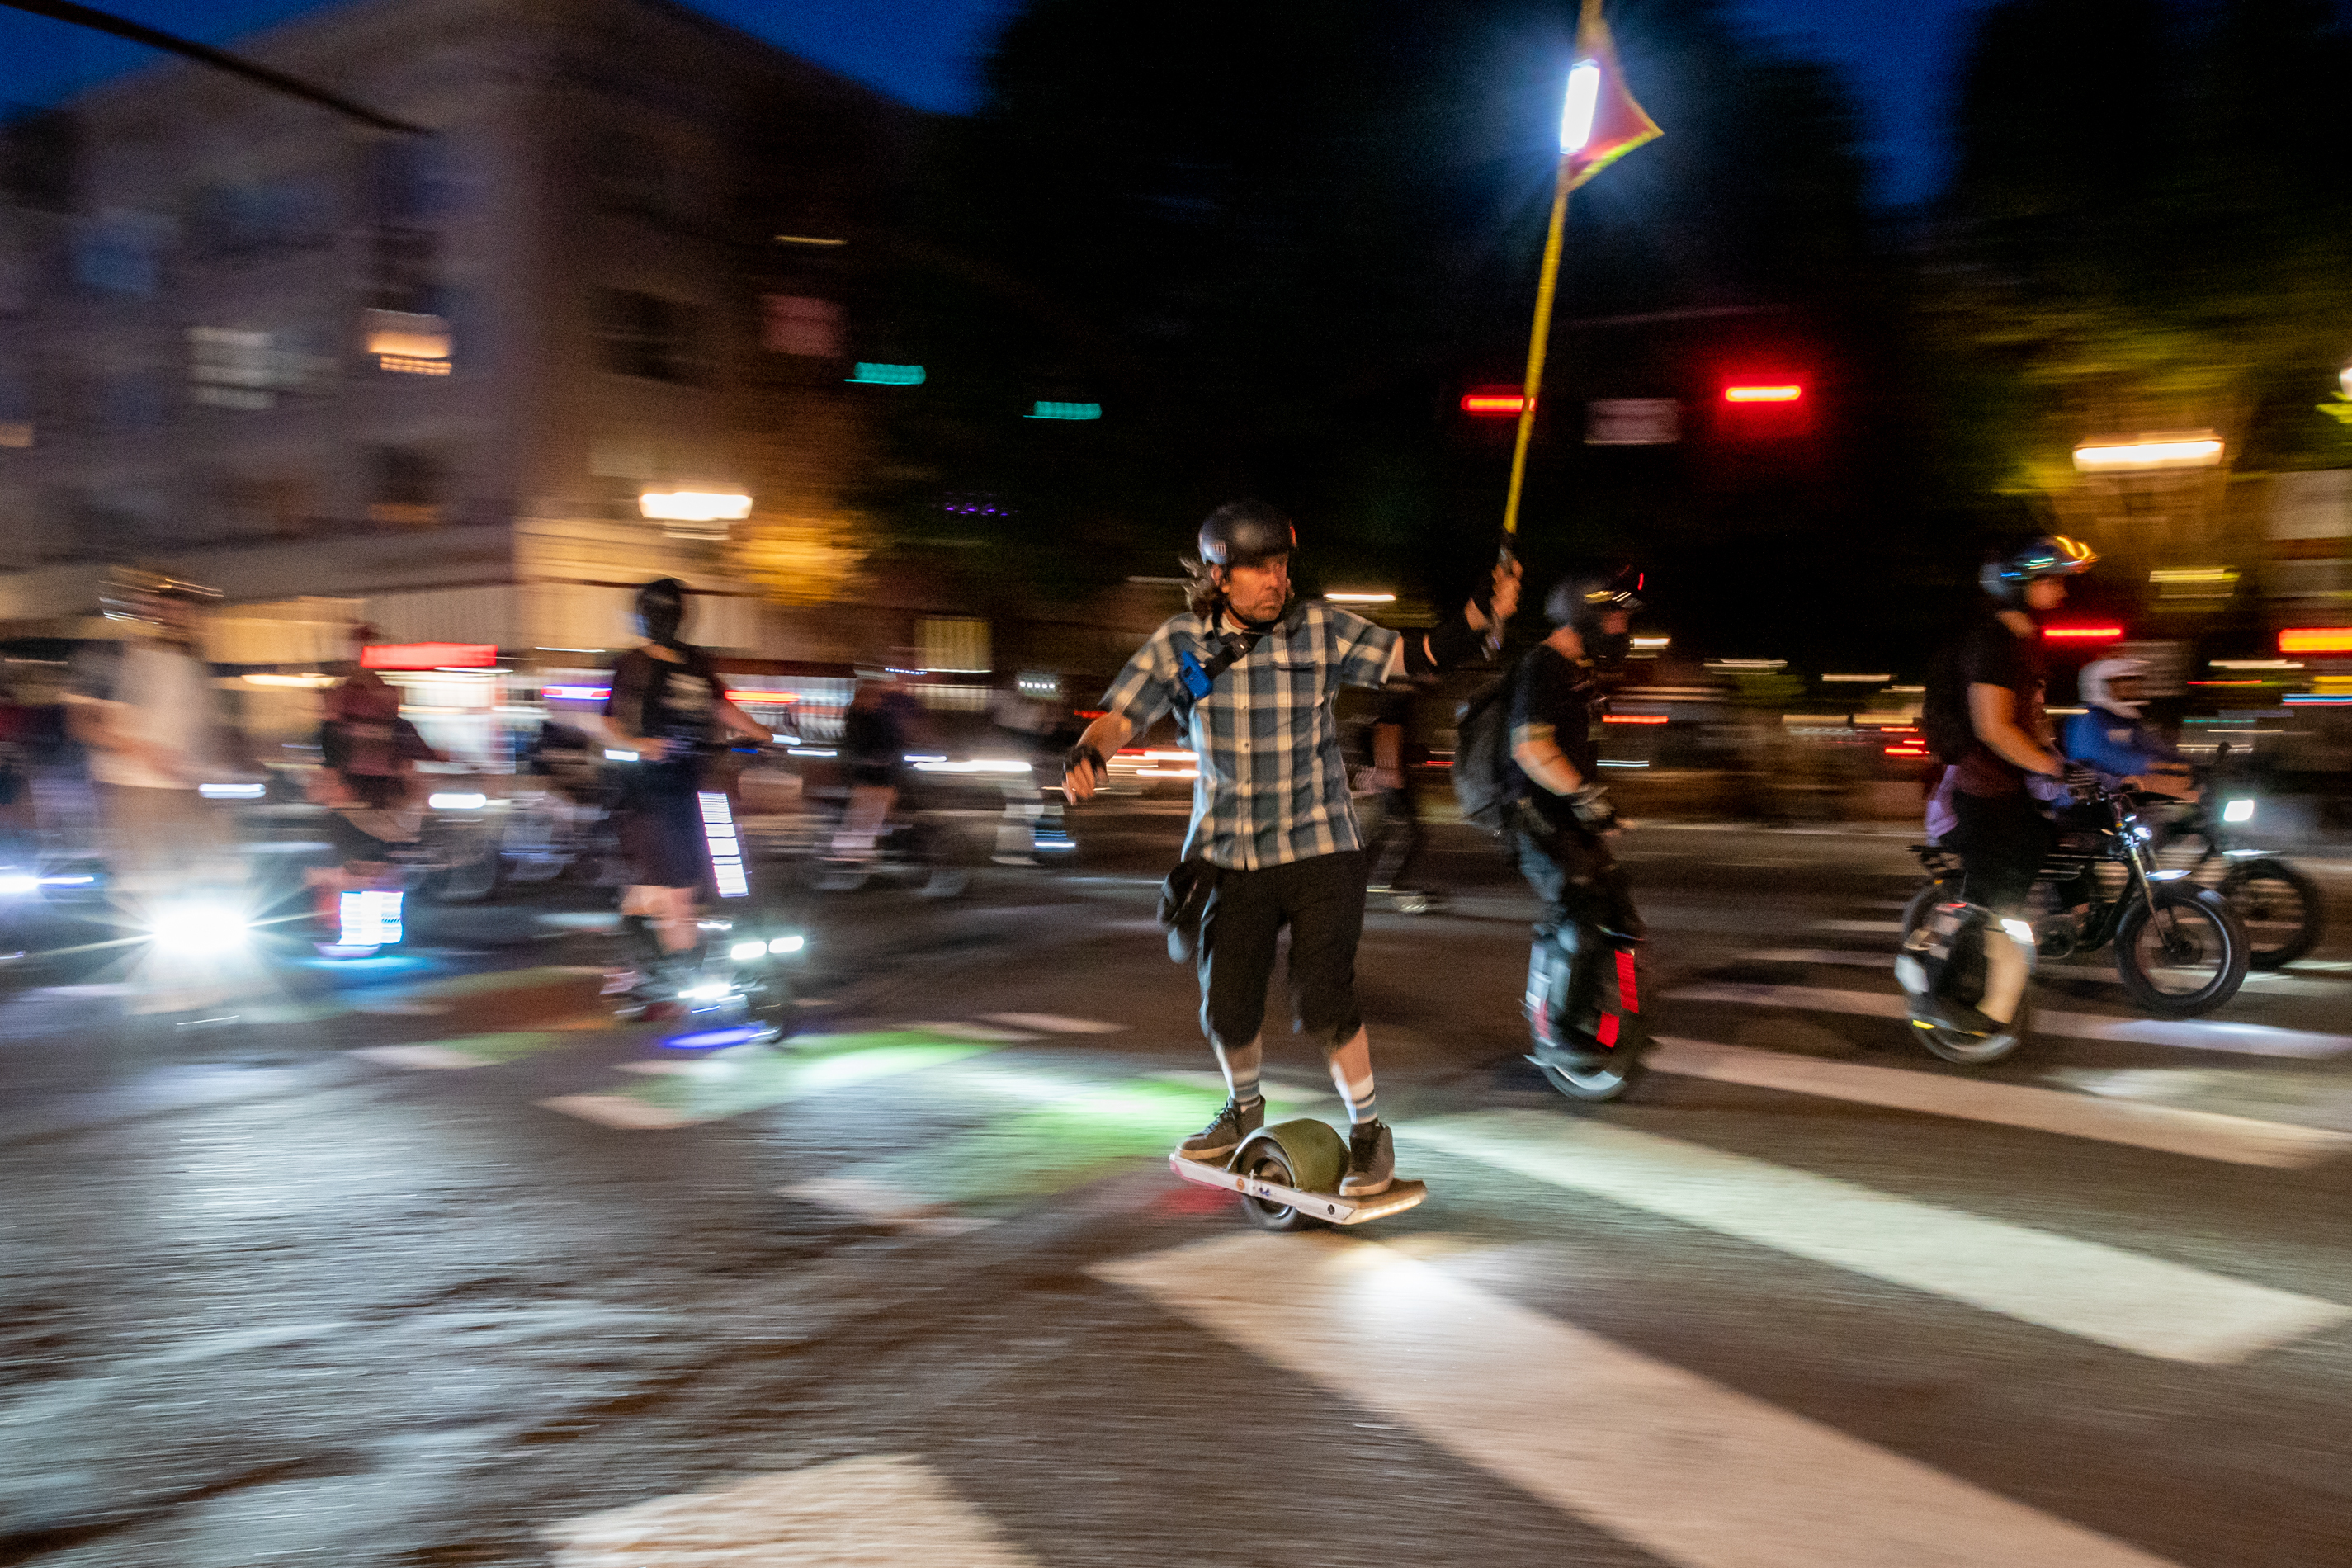 Did you spot a parade of electric unicycles? It's Portland's weekly Friday  Night Ride – Here is Oregon 